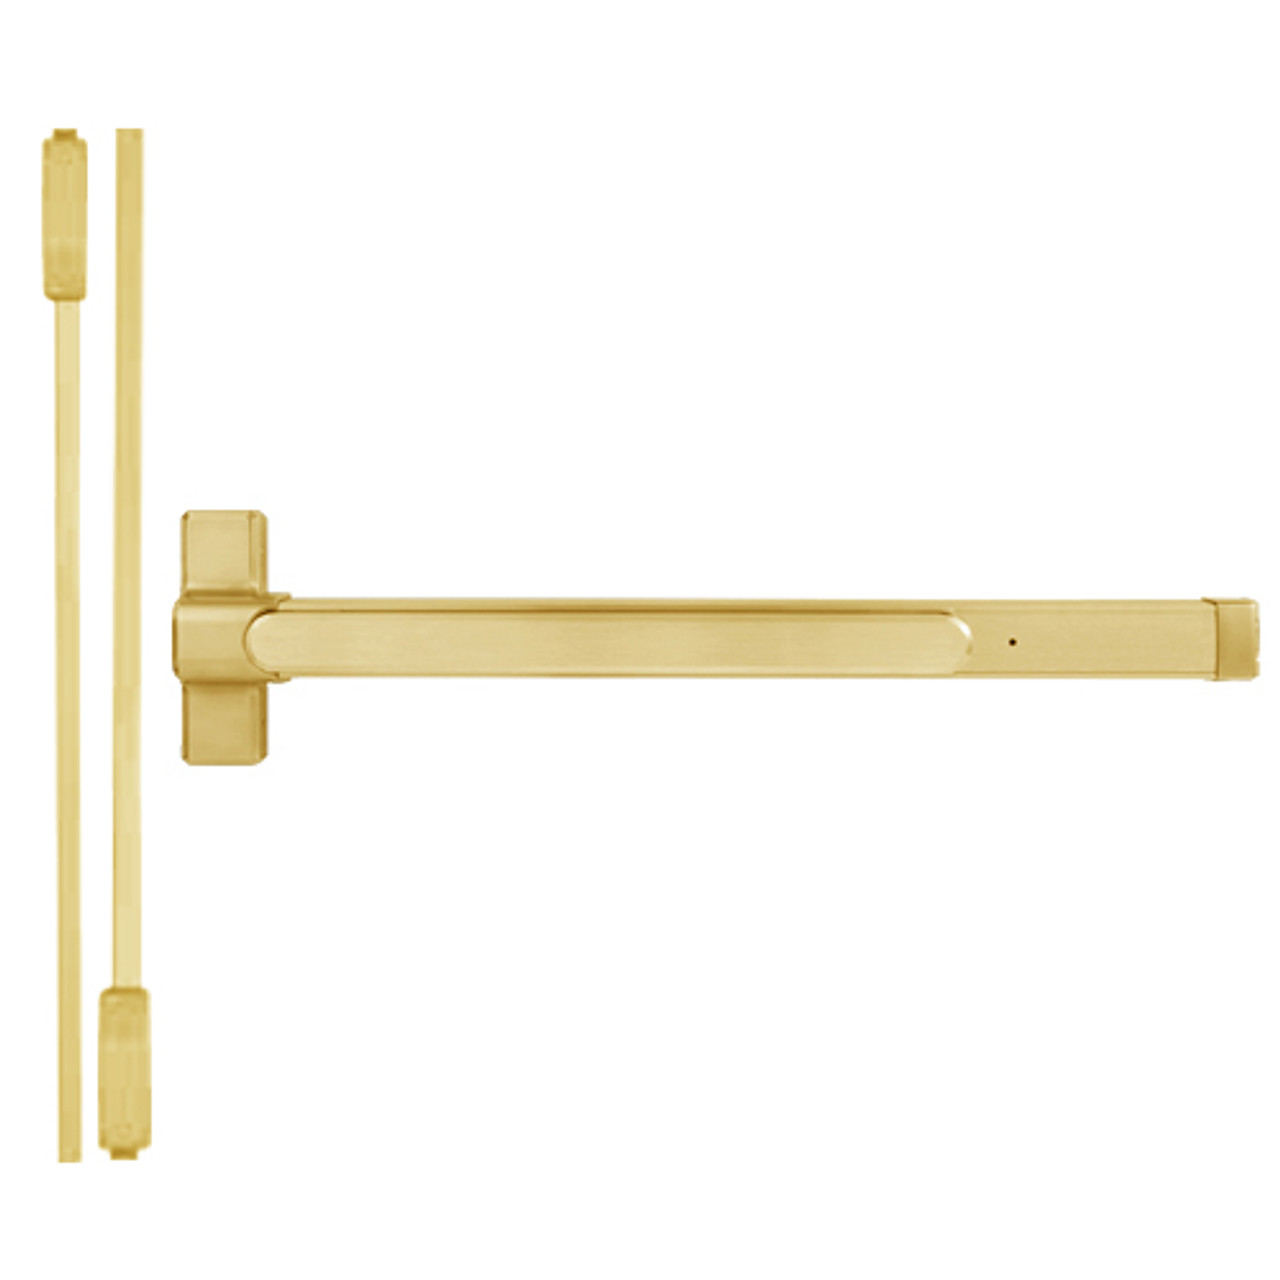 QED116LR-48-7-605 Stanley QED100 Series Heavy Duty Surface Vertical Rod Fire Rated Exit Device in Bright Brass Finish